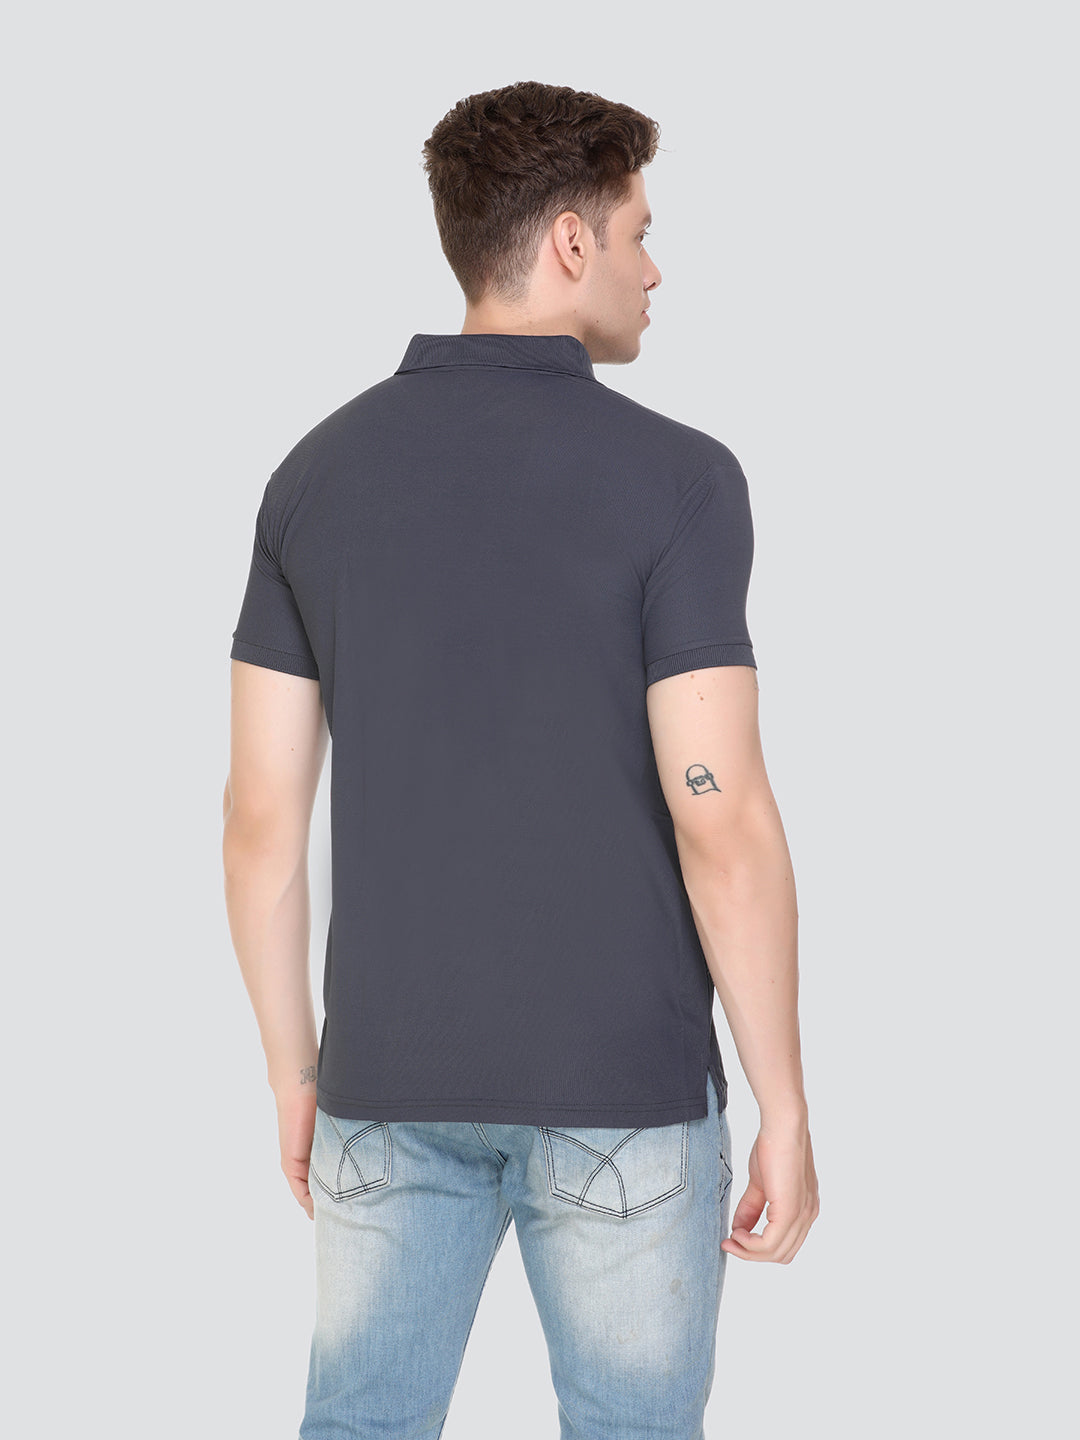 Comfortable Jinxer Hale Blue Dry Fit Polo Neck T Shirt for men online in India